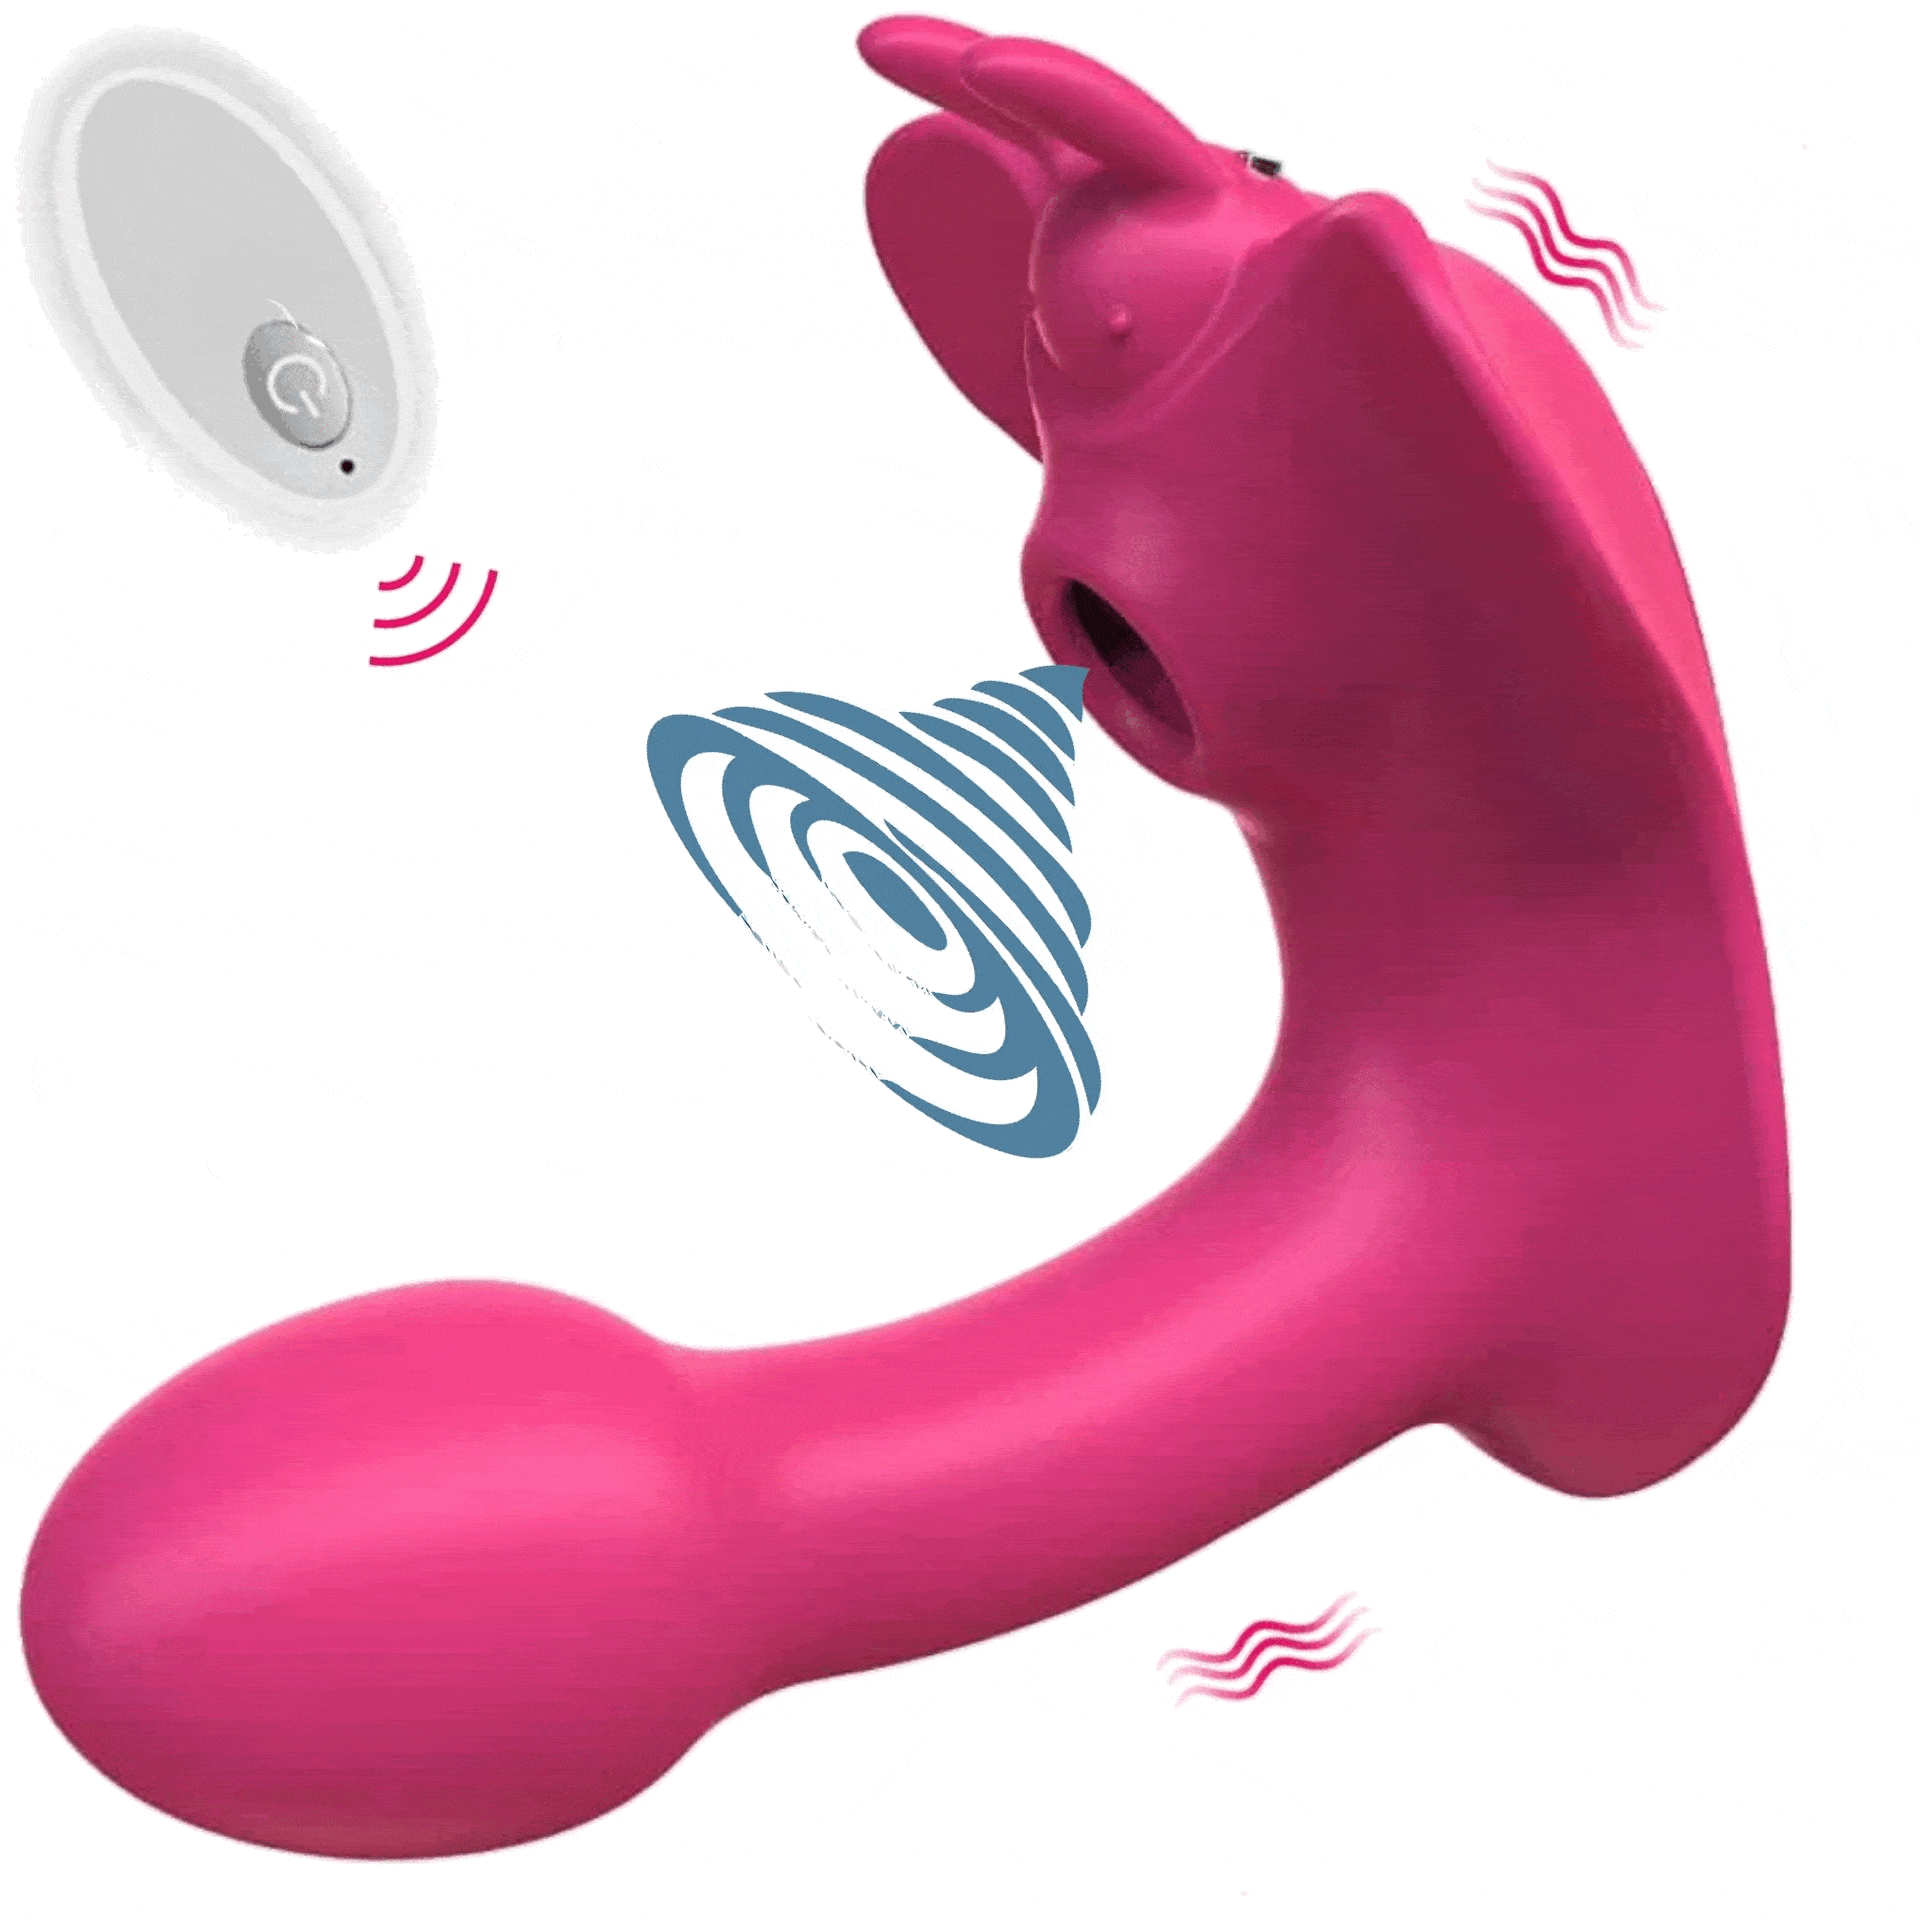 Joie De Vivre Bio Air Remote Control Vibrator. Shop now at Adult Luxury. For all sex toys and accessories.